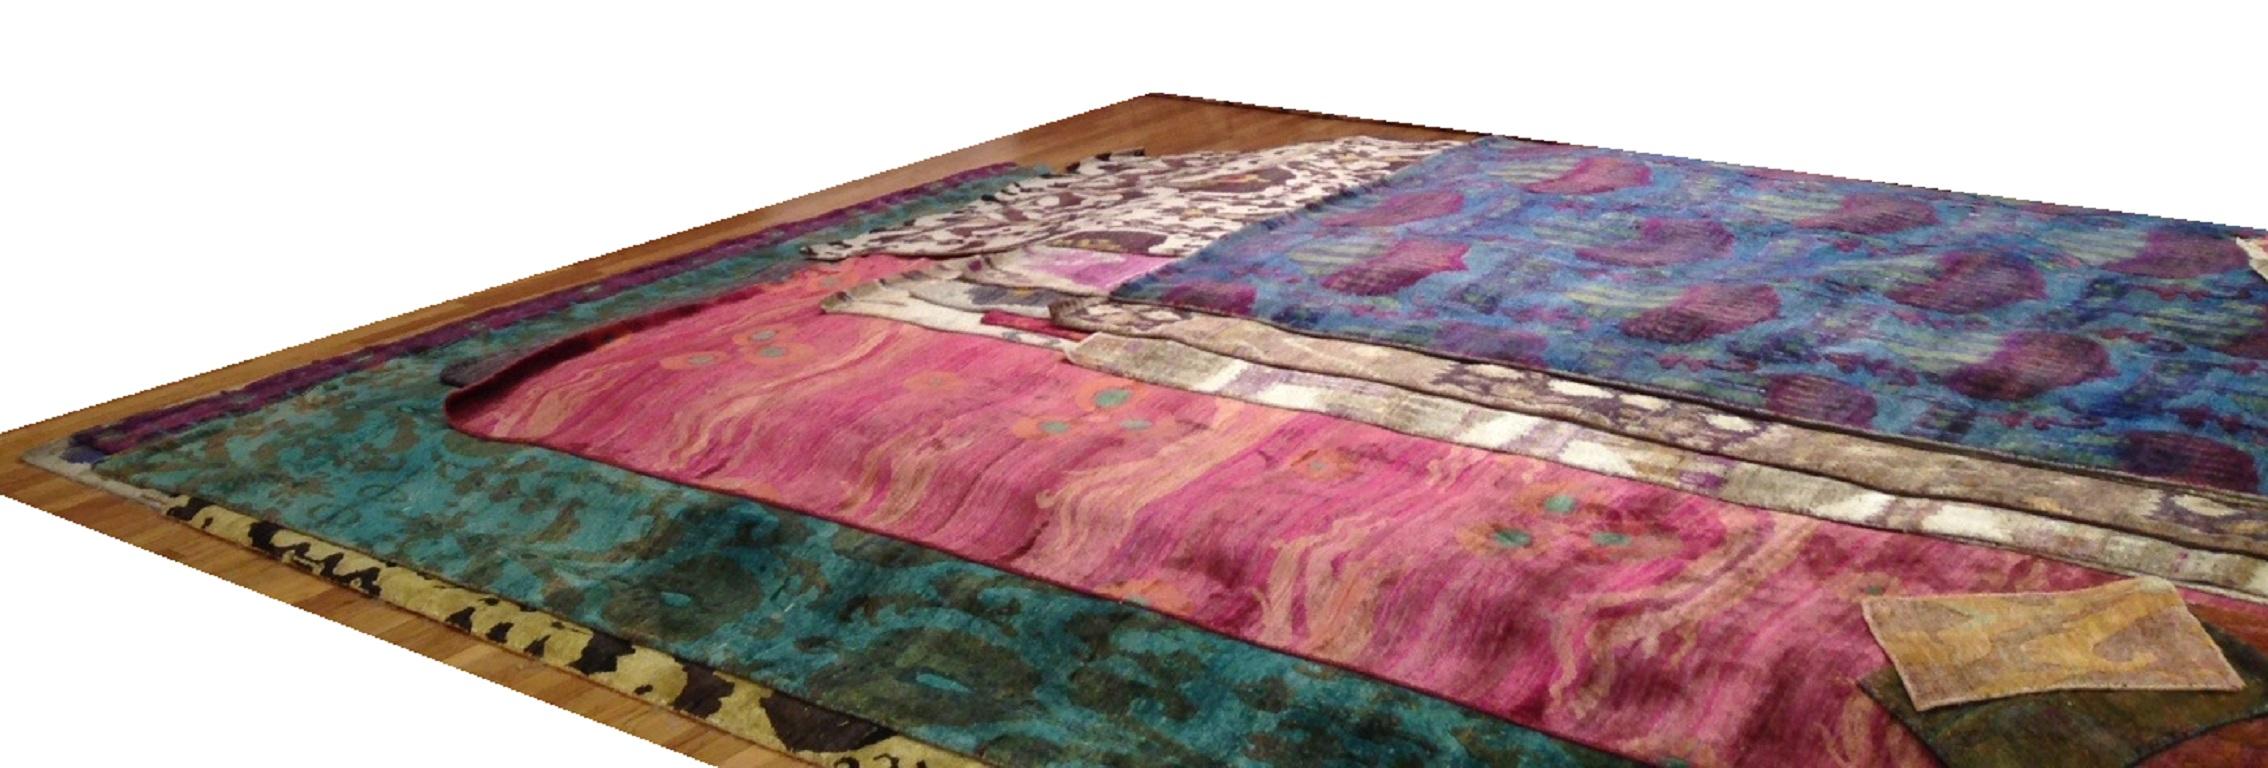 The Rumi collection master weavers artfully re-spin and hand-knot the finest remnants of sustainable sari-silk to create the breakthrough Rumi silk collection. These remarkable patterns, conveyed in fresh colors, dictate a new aesthetic for modern